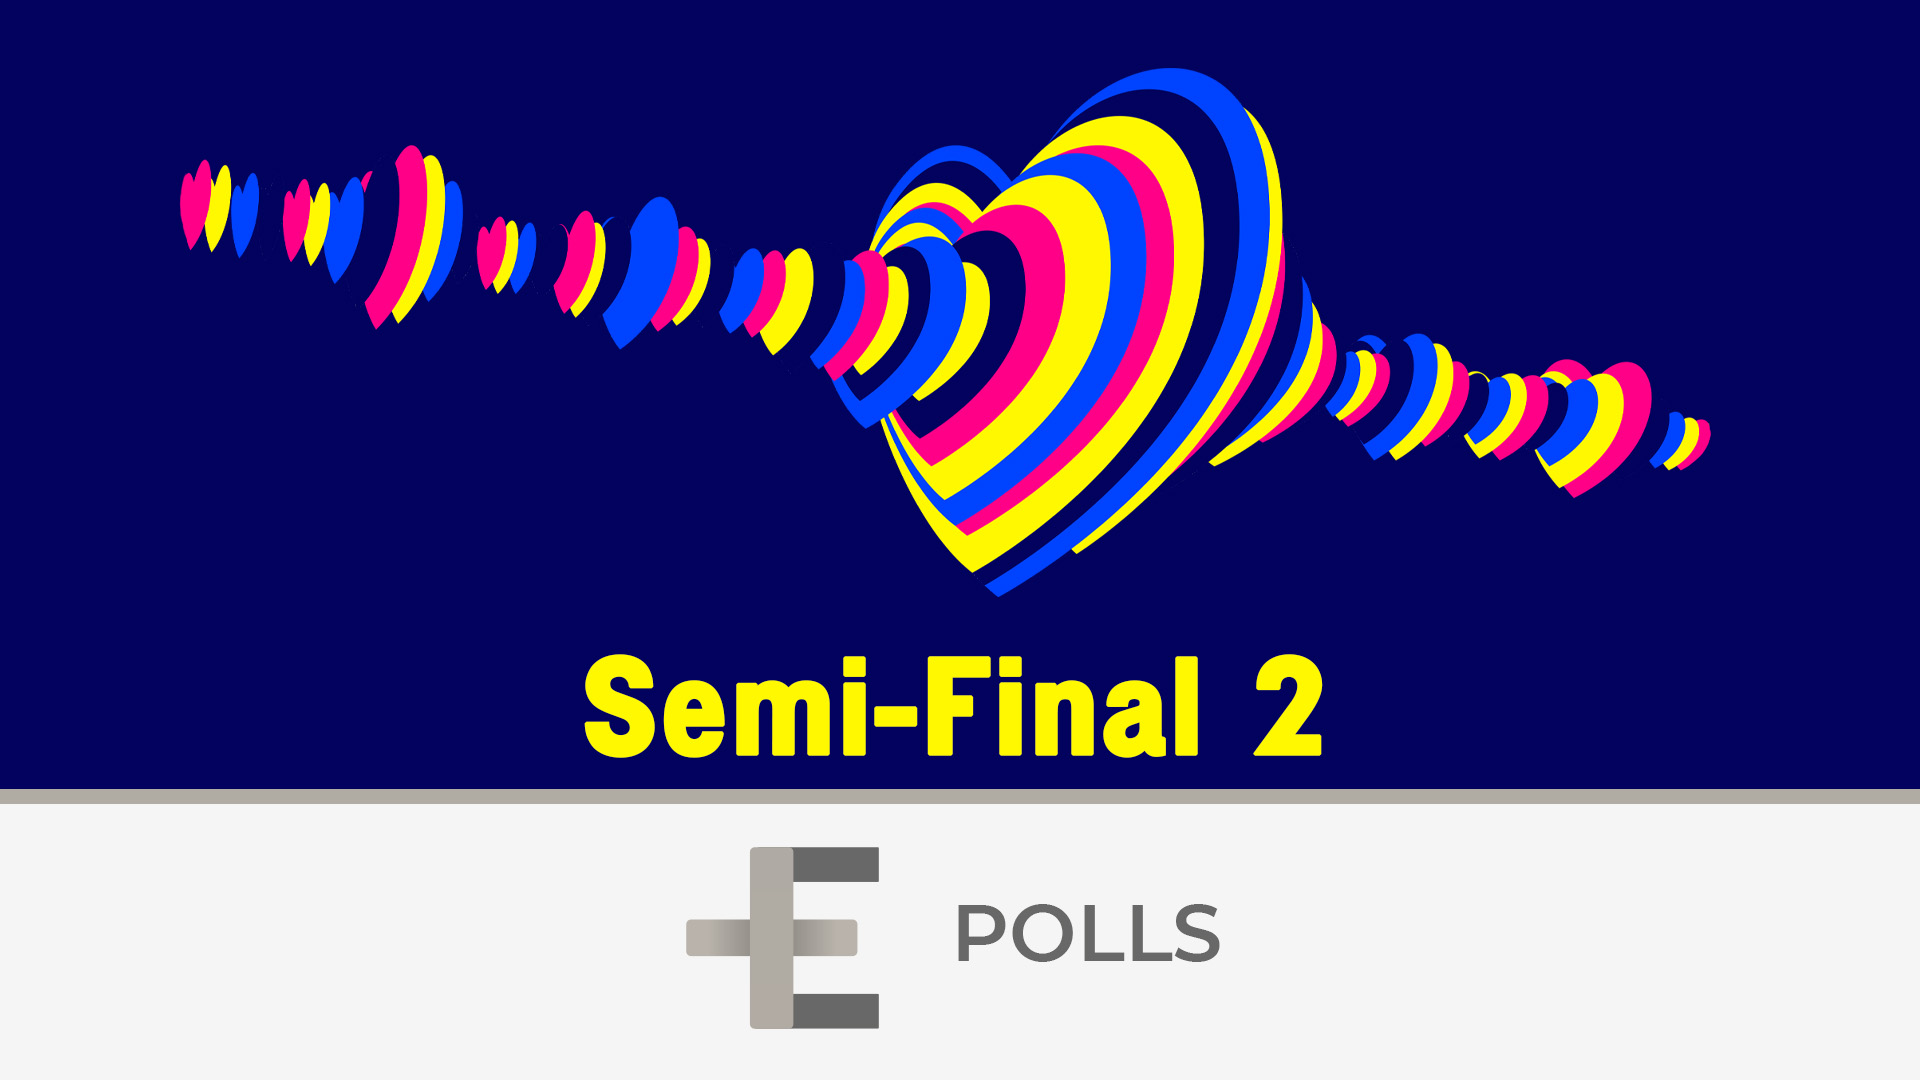 Poll: Who should qualify from the Eurovision 2023 Semi-Final 2?